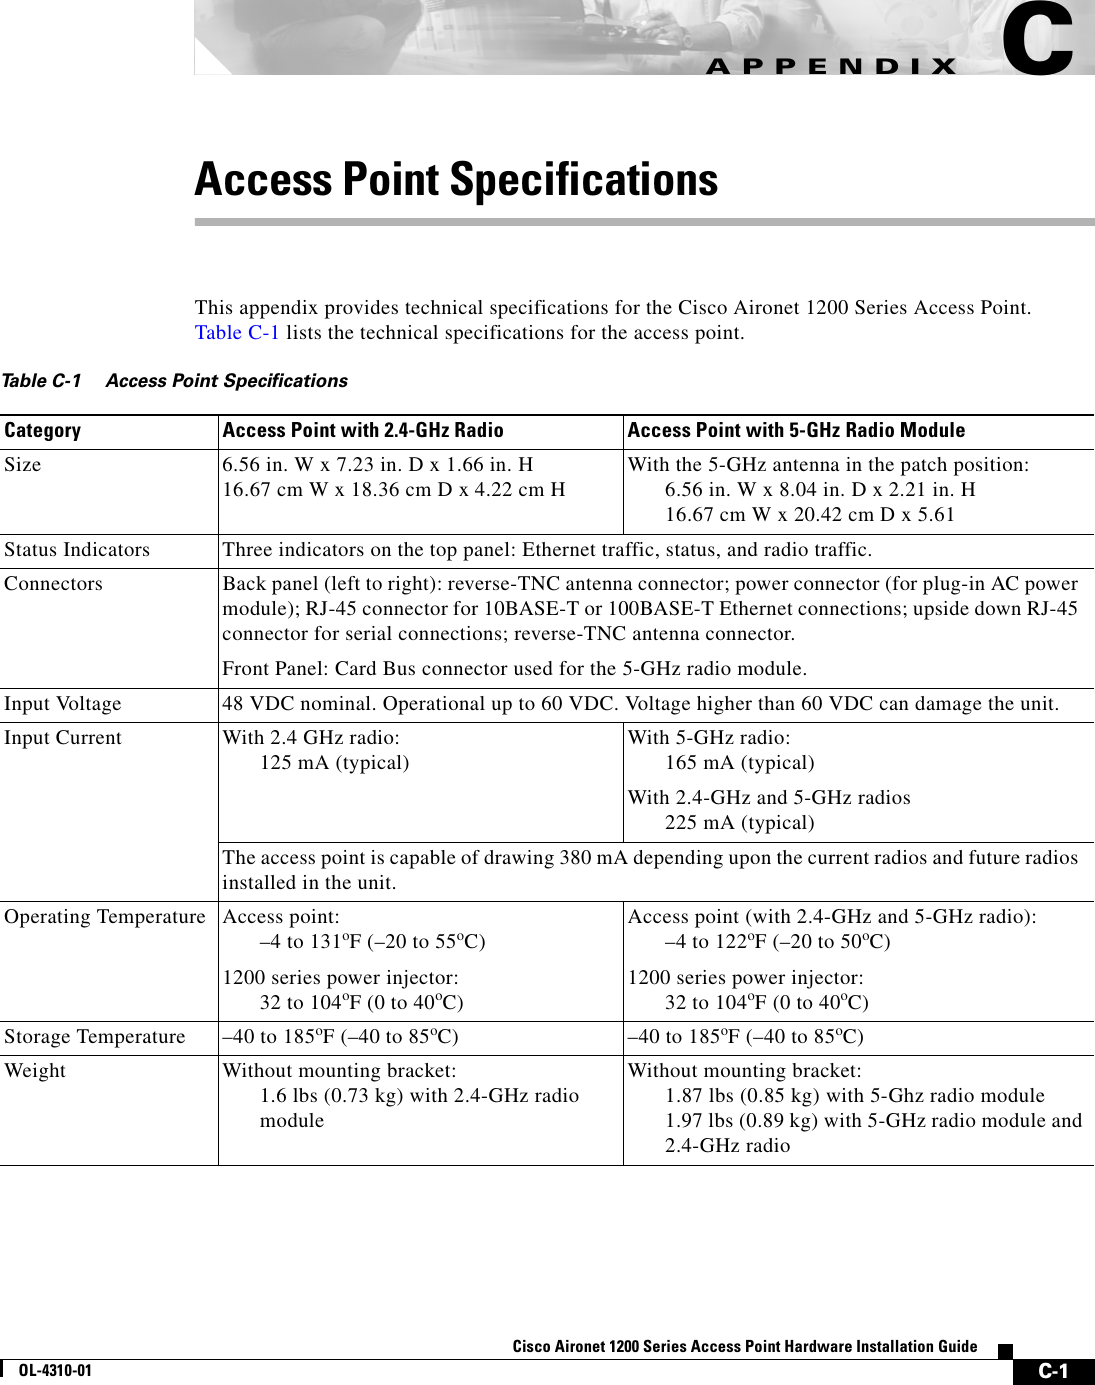  C-1Cisco Aironet 1200 Series Access Point Hardware Installation GuideOL-4310-01APPENDIXCAccess Point SpecificationsThis appendix provides technical specifications for the Cisco Aironet 1200 Series Access Point. Table C-1 lists the technical specifications for the access point.Table C-1 Access Point SpecificationsCategory Access Point with 2.4-GHz Radio Access Point with 5-GHz Radio ModuleSize 6.56 in. W x 7.23 in. D x 1.66 in. H16.67 cm W x 18.36 cm D x 4.22 cm H  With the 5-GHz antenna in the patch position:6.56 in. W x 8.04 in. D x 2.21 in. H 16.67 cm W x 20.42 cm D x 5.61Status Indicators Three indicators on the top panel: Ethernet traffic, status, and radio traffic.Connectors Back panel (left to right): reverse-TNC antenna connector; power connector (for plug-in AC power module); RJ-45 connector for 10BASE-T or 100BASE-T Ethernet connections; upside down RJ-45 connector for serial connections; reverse-TNC antenna connector.Front Panel: Card Bus connector used for the 5-GHz radio module.Input Voltage  48 VDC nominal. Operational up to 60 VDC. Voltage higher than 60 VDC can damage the unit.Input Current With 2.4 GHz radio:125 mA (typical) With 5-GHz radio:165 mA (typical) With 2.4-GHz and 5-GHz radios225 mA (typical) The access point is capable of drawing 380 mA depending upon the current radios and future radios installed in the unit.Operating Temperature Access point:–4 to 131oF (–20 to 55oC) 1200 series power injector:32 to 104oF (0 to 40oC) Access point (with 2.4-GHz and 5-GHz radio):–4 to 122oF (–20 to 50oC) 1200 series power injector:32 to 104oF (0 to 40oC)Storage Temperature  –40 to 185oF (–40 to 85oC)  –40 to 185oF (–40 to 85oC) Weight Without mounting bracket:1.6 lbs (0.73 kg) with 2.4-GHz radiomoduleWithout mounting bracket:1.87 lbs (0.85 kg) with 5-Ghz radio module1.97 lbs (0.89 kg) with 5-GHz radio module and2.4-GHz radio